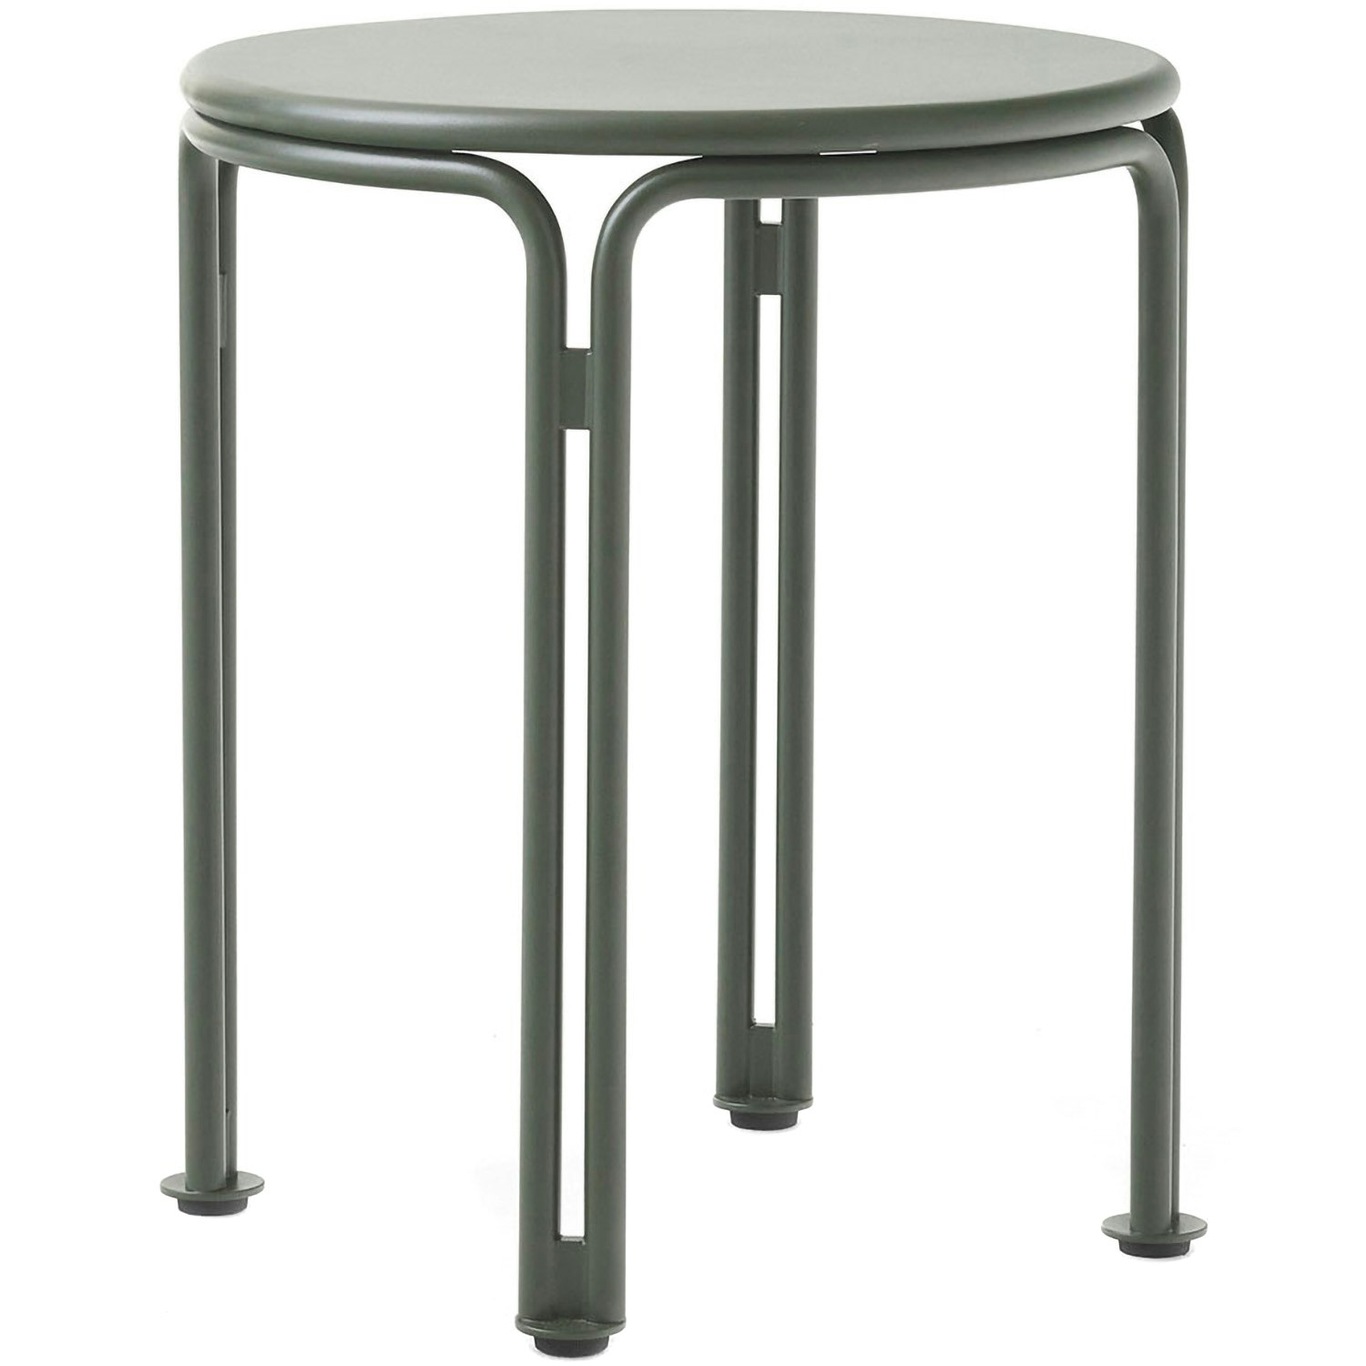 Thorvald SC102 Side Table, Bronze Green